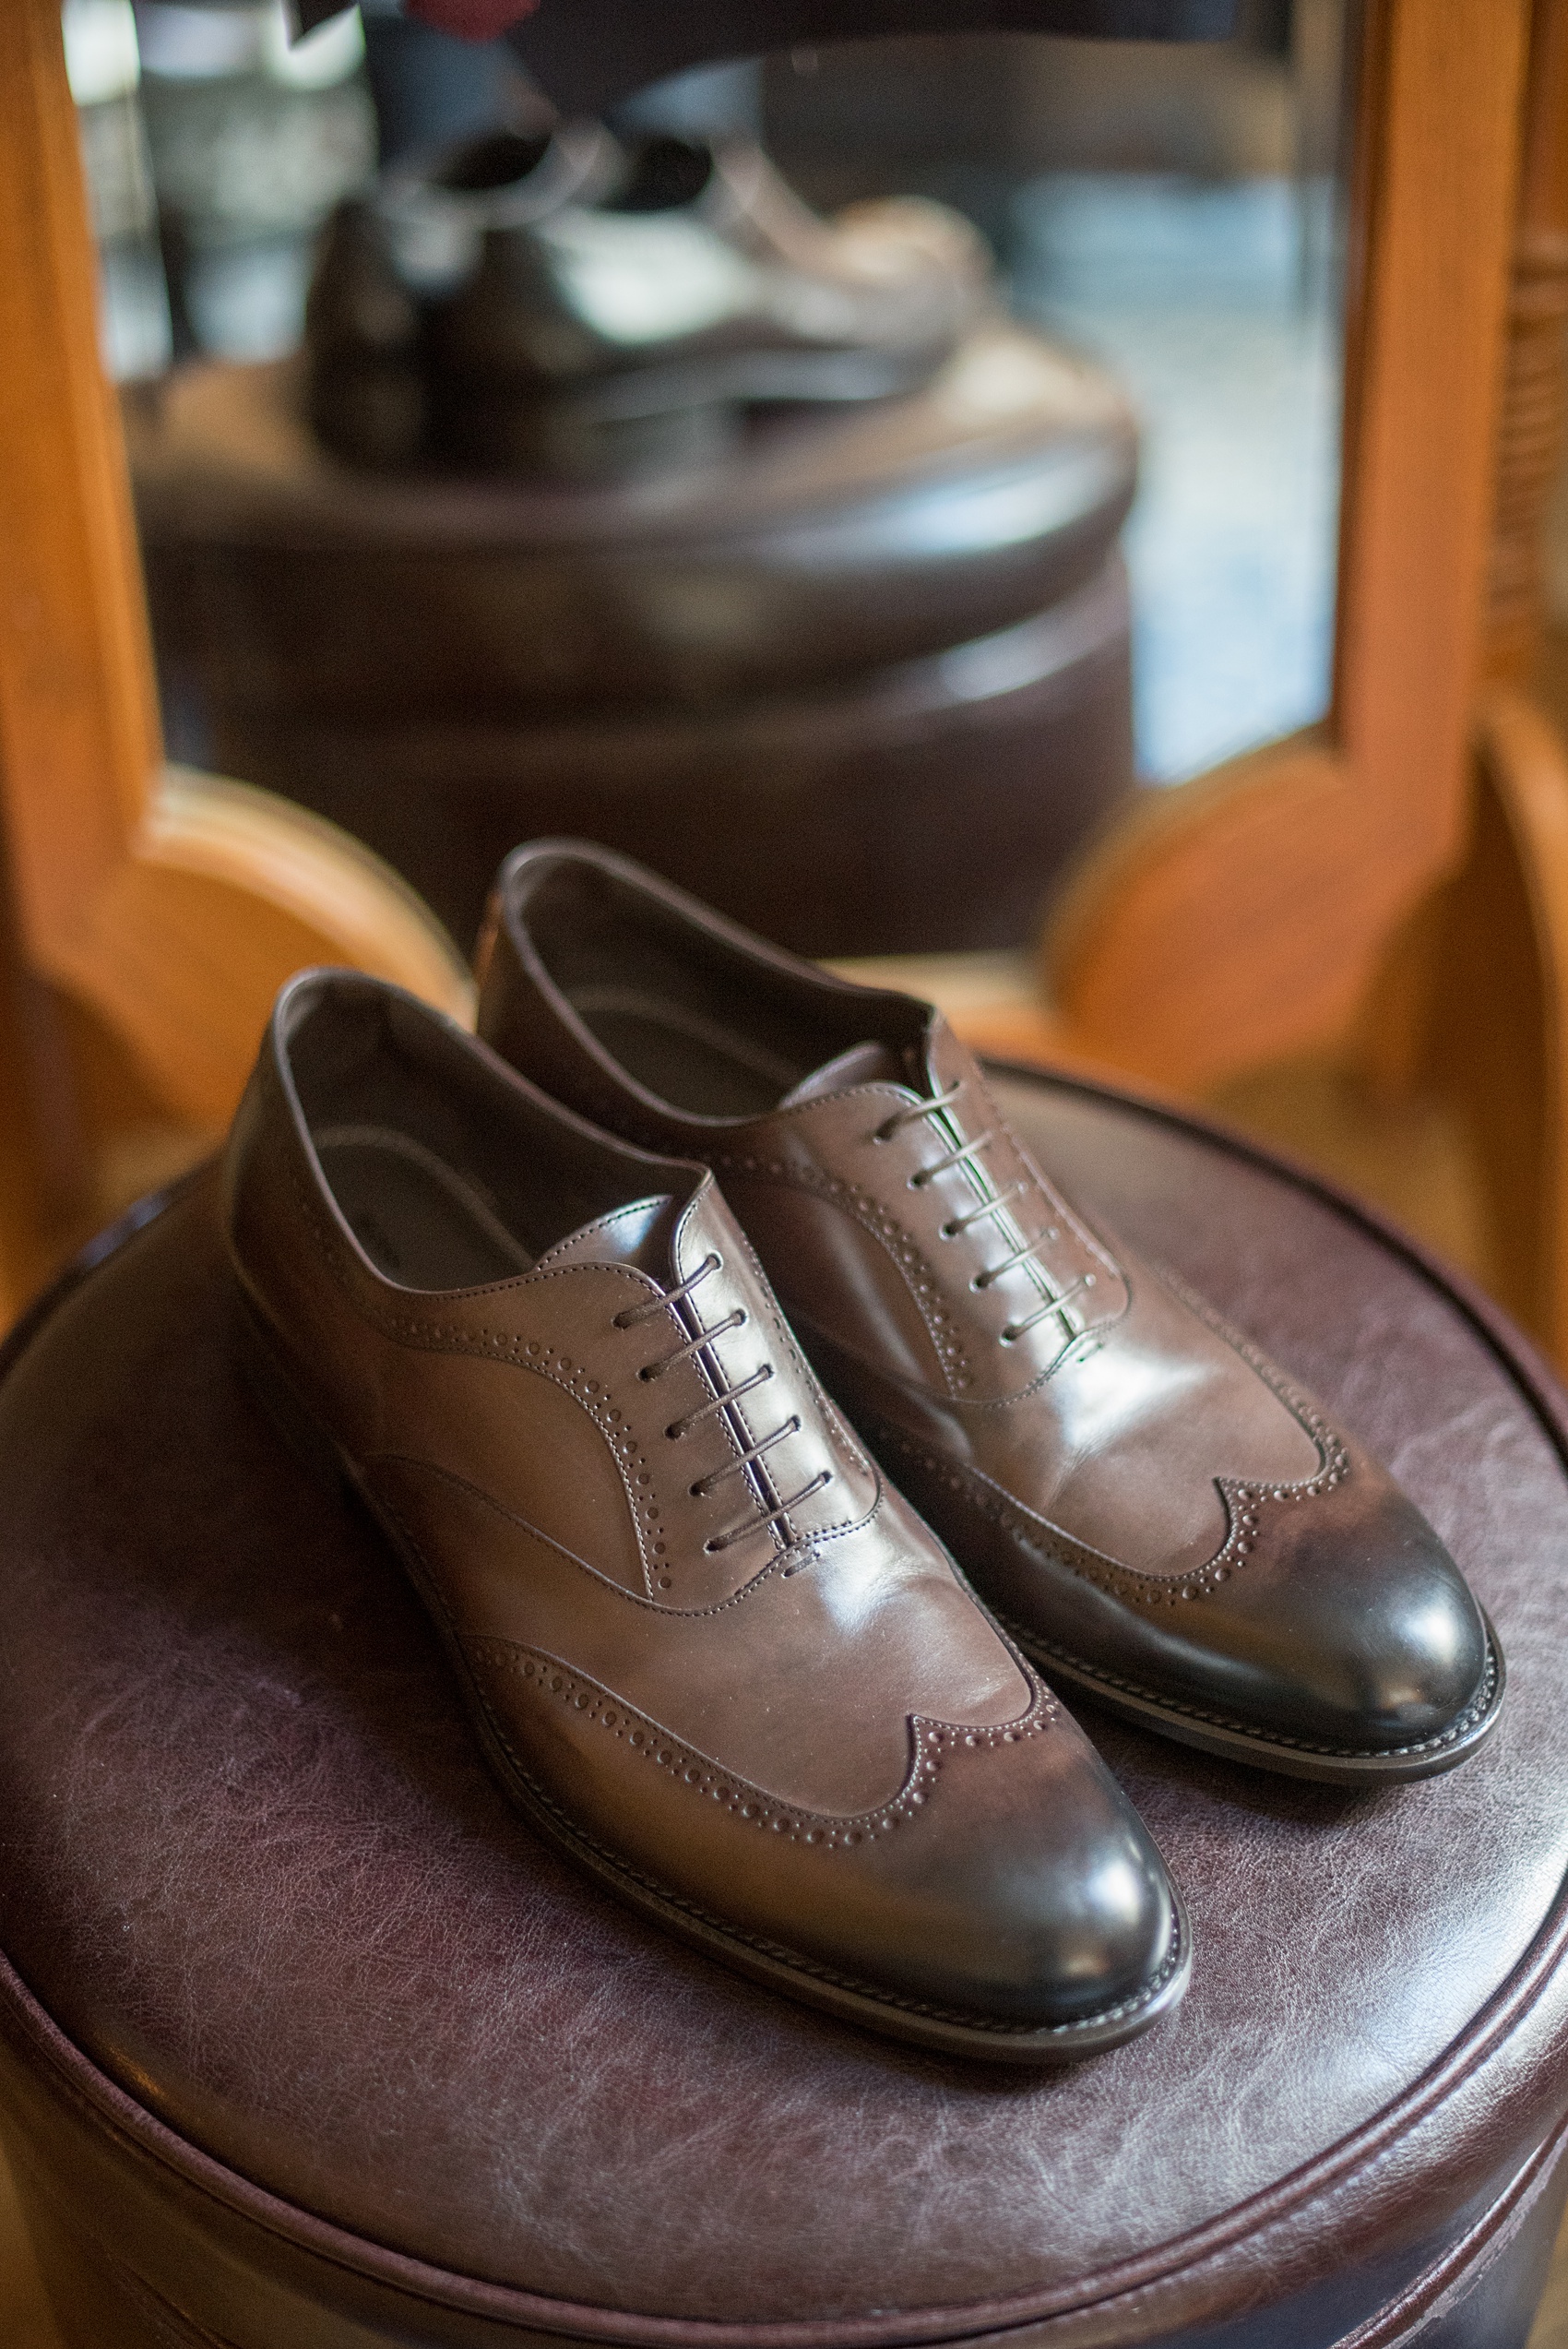 Mikkel Paige Photography photos of a wedding at Crabtree's Kittle House in Chappaqua, New York. Picture of the groom's dark brown leather dress shoes.